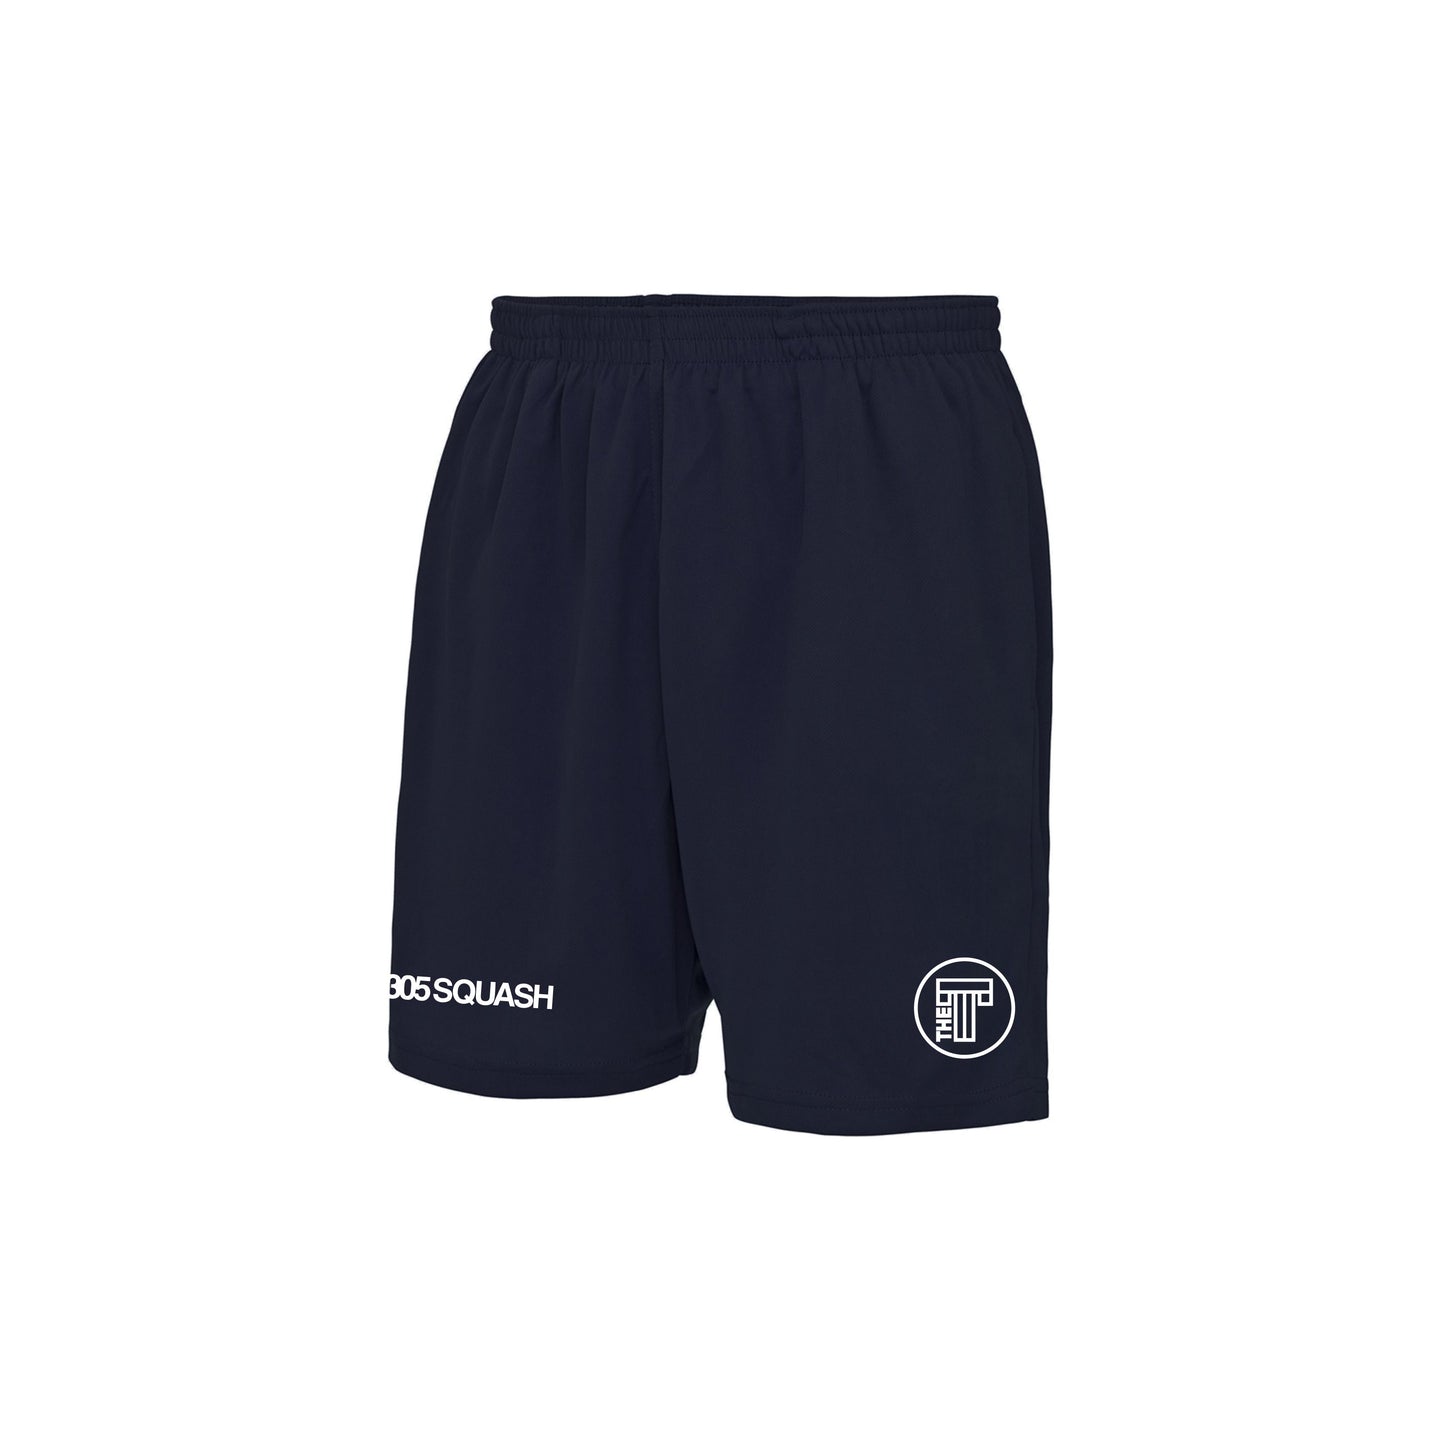 The T Squash Academy Action Kids Shorts